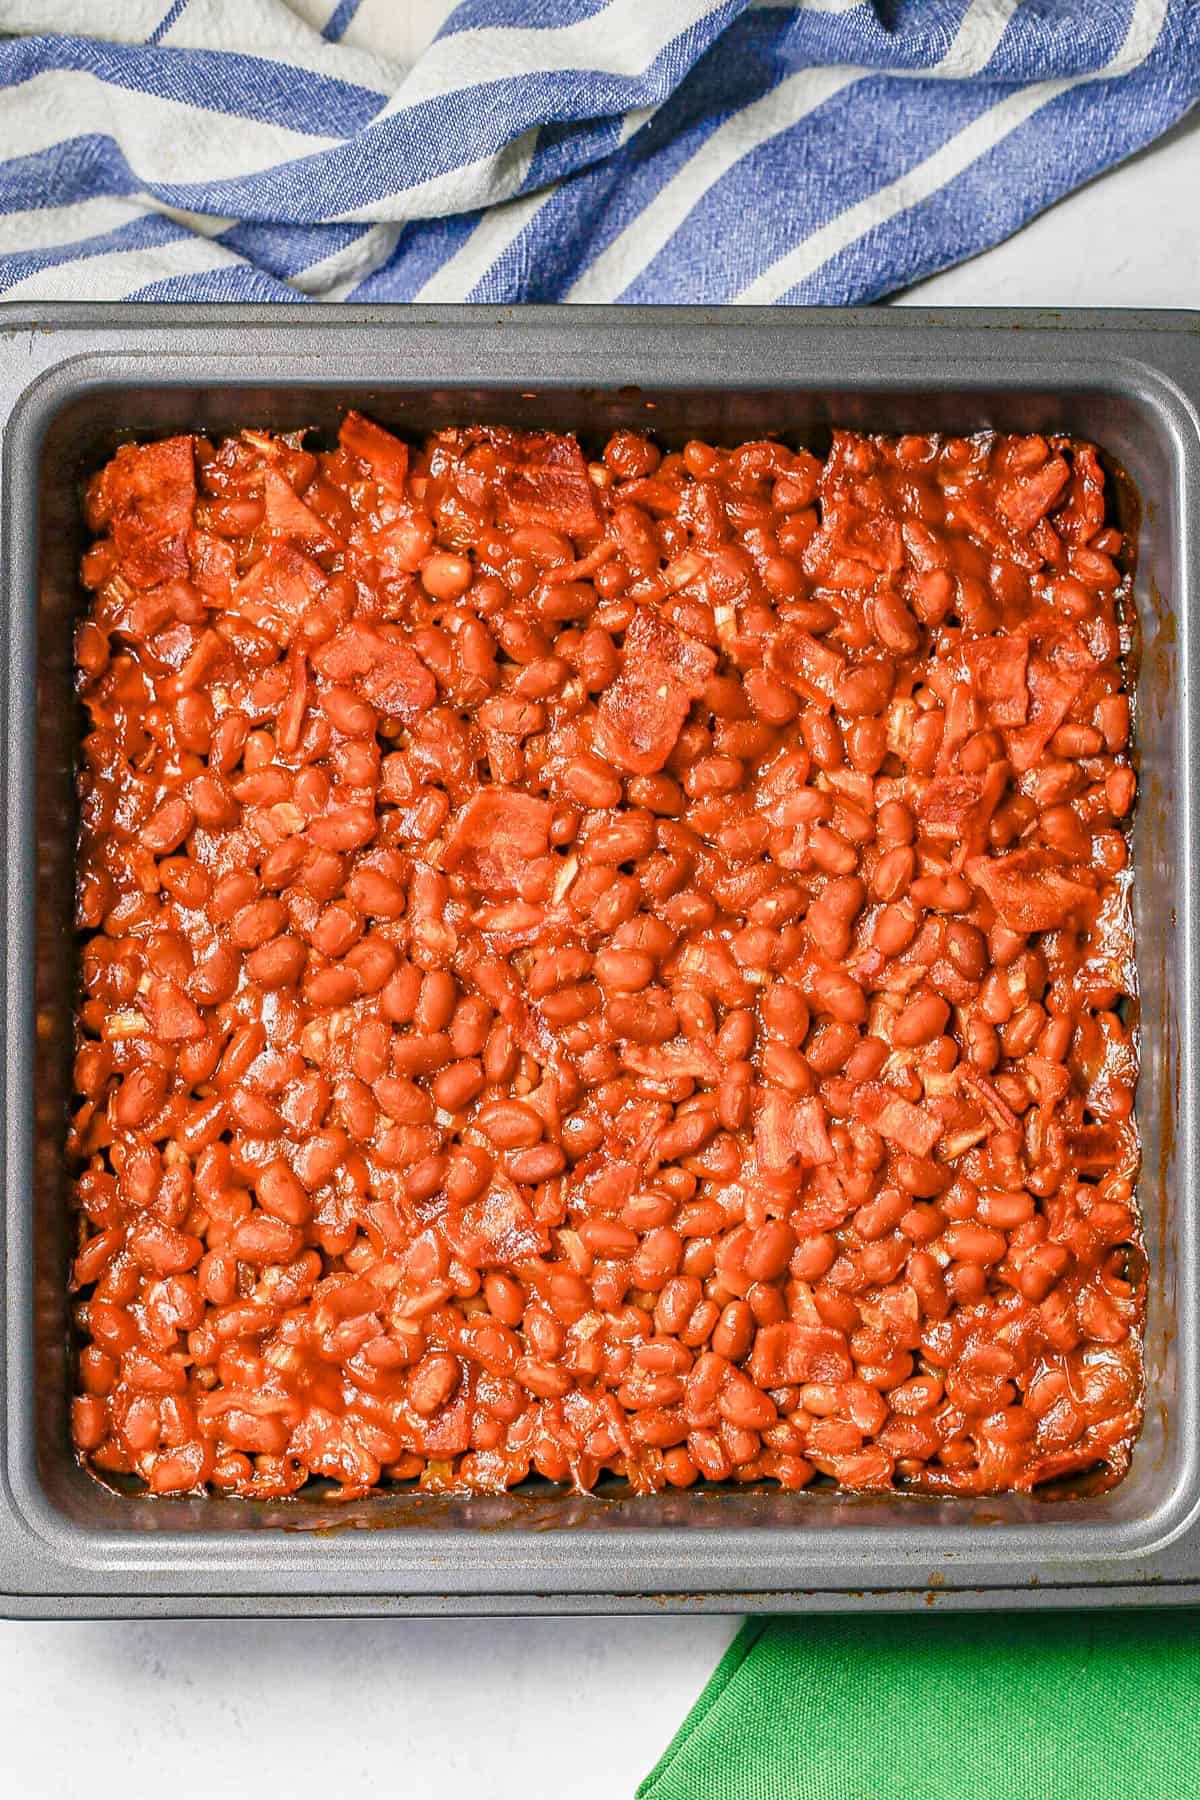 Baked beans with bacon in a square nonstick pan after cooking.